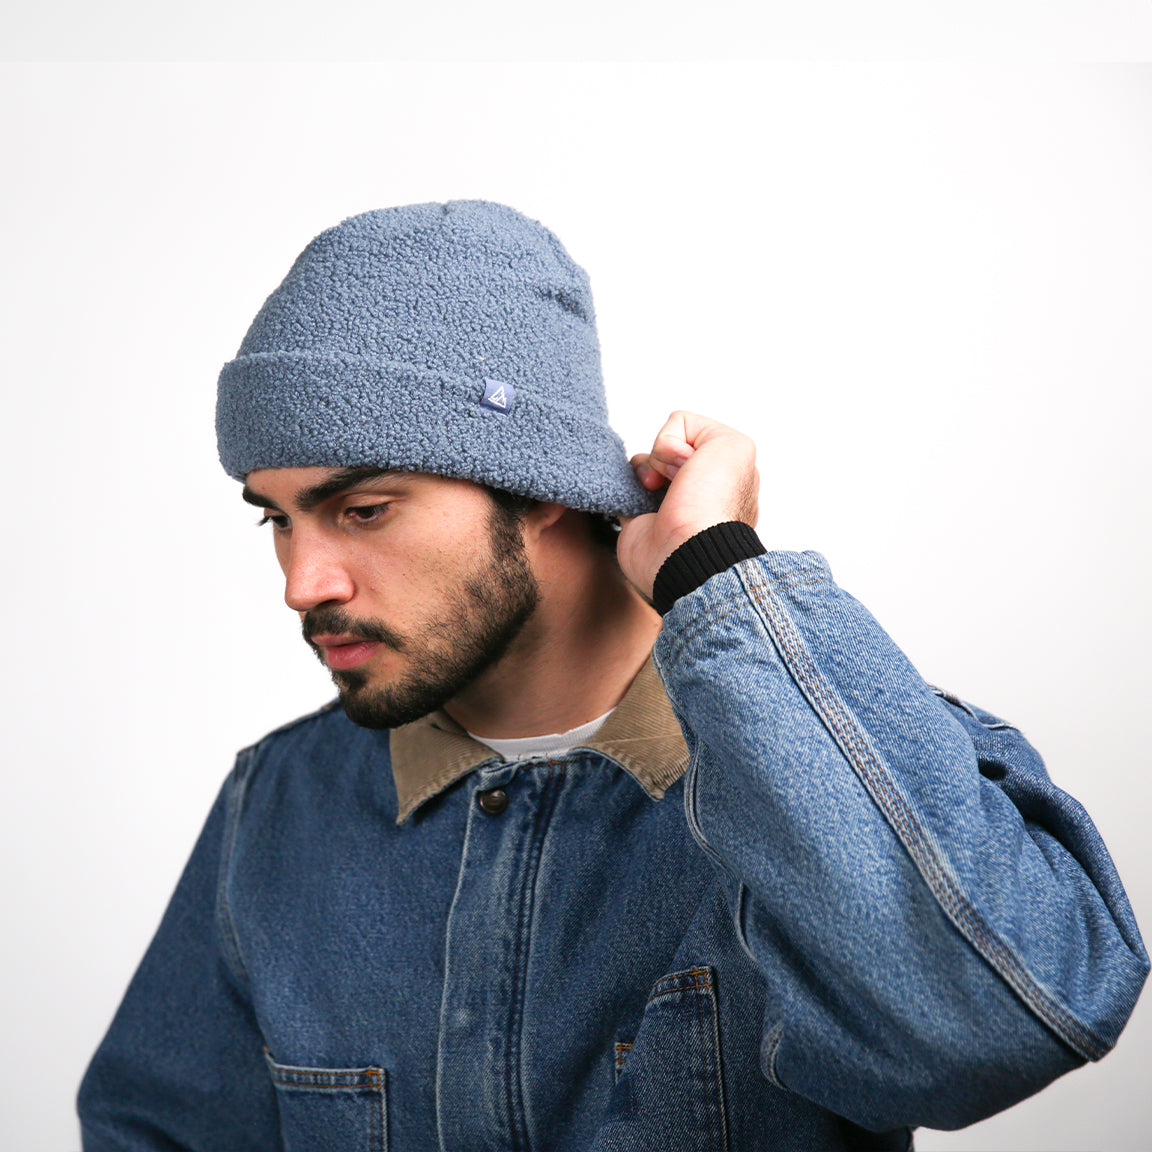 A person wearing a beanie that is a soft blue fleece with a rolled-up brim and a small blue triangular logo. The person is adjusting the beanie at the back, indicating a flexible and comfortable fit. The slouchy top suggests a relaxed style, complementing the casual denim jacket with its tan collar.